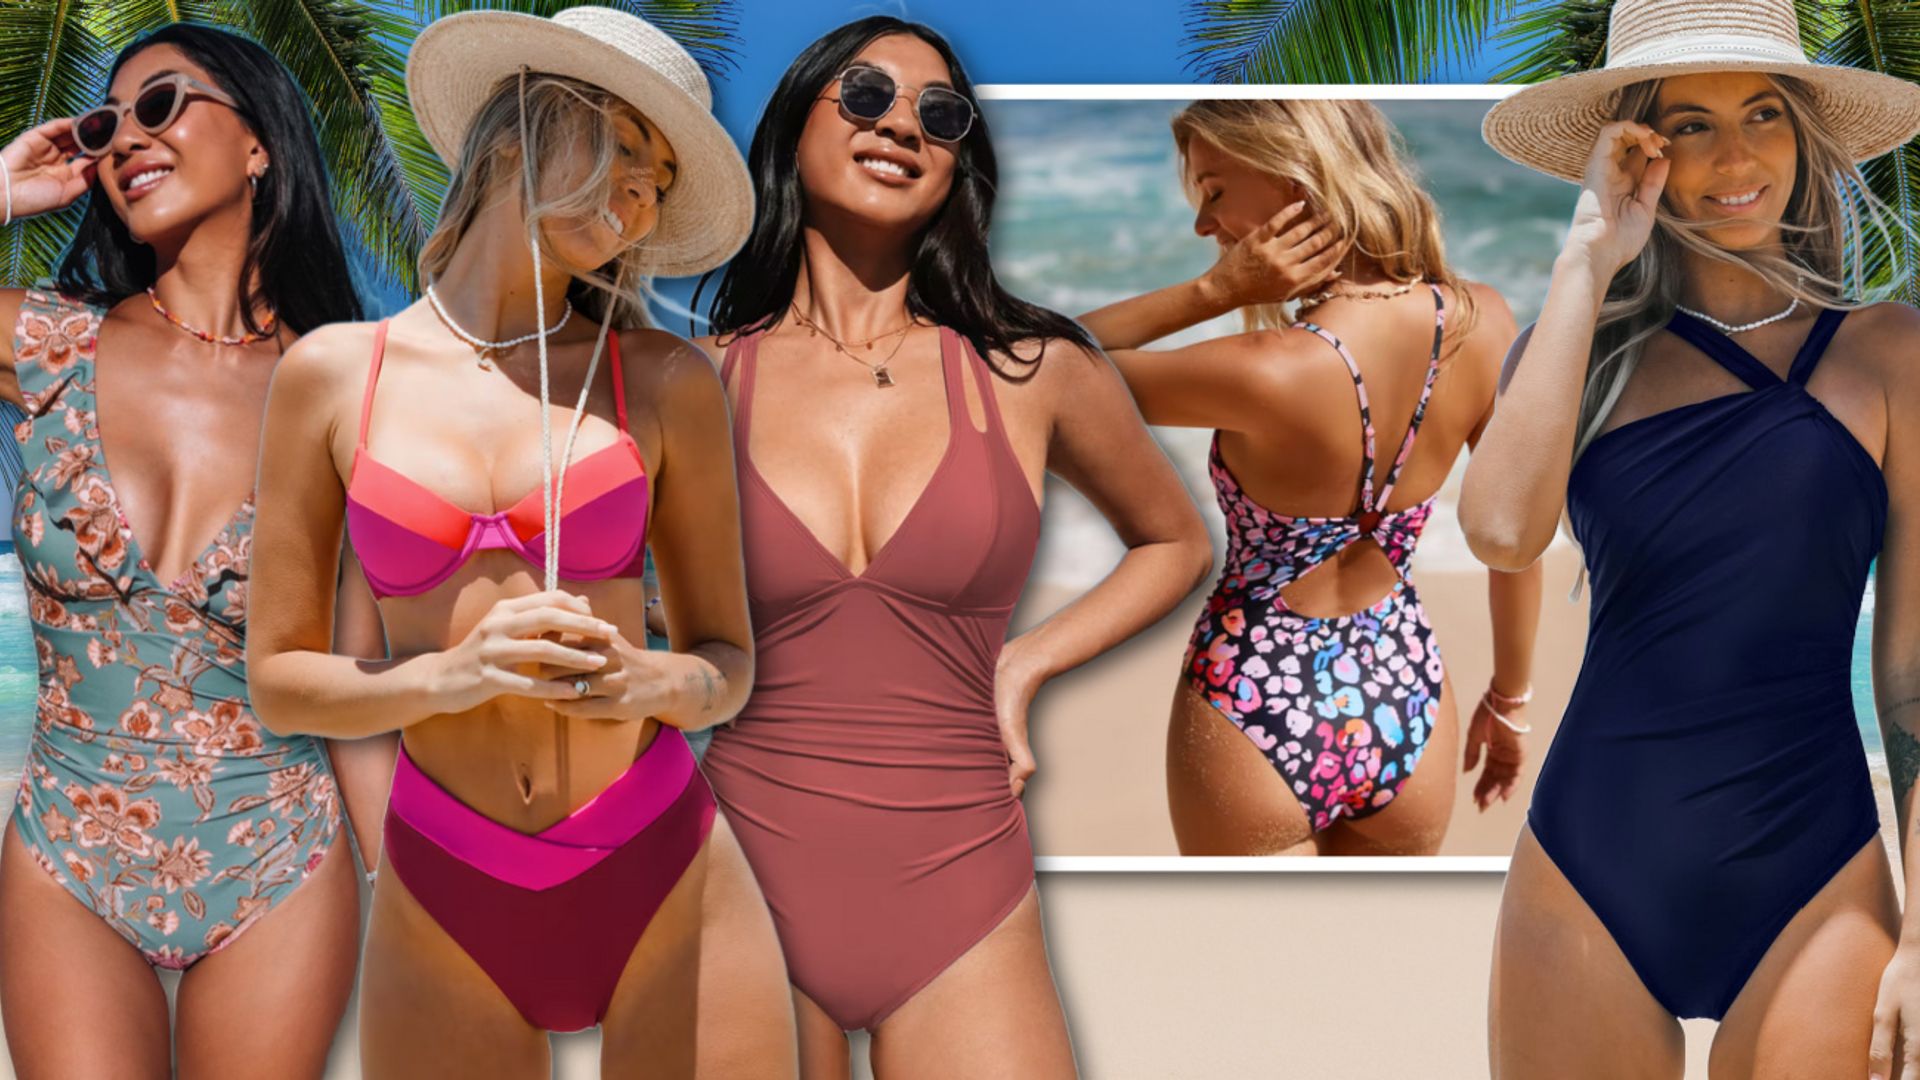 I searched Cupshe's trending swimsuits for the most flattering - these are my picks for summer